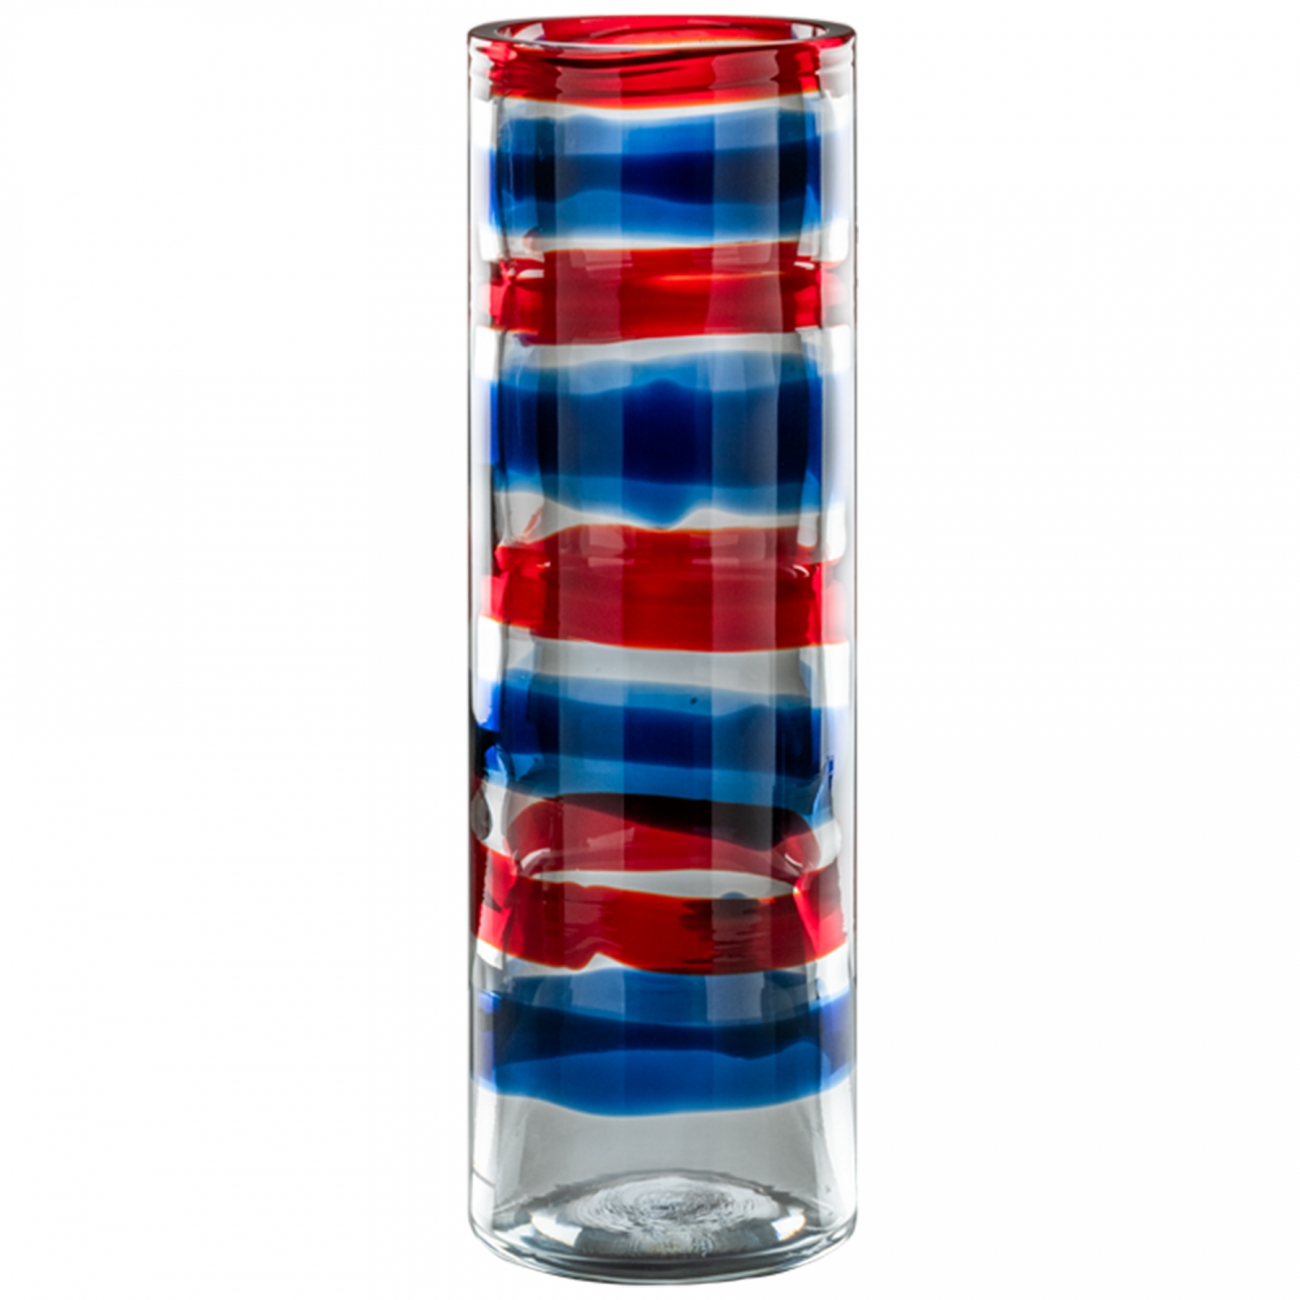 Venini Anelli Vase Grass Crystal Marine Blue / Red Bands